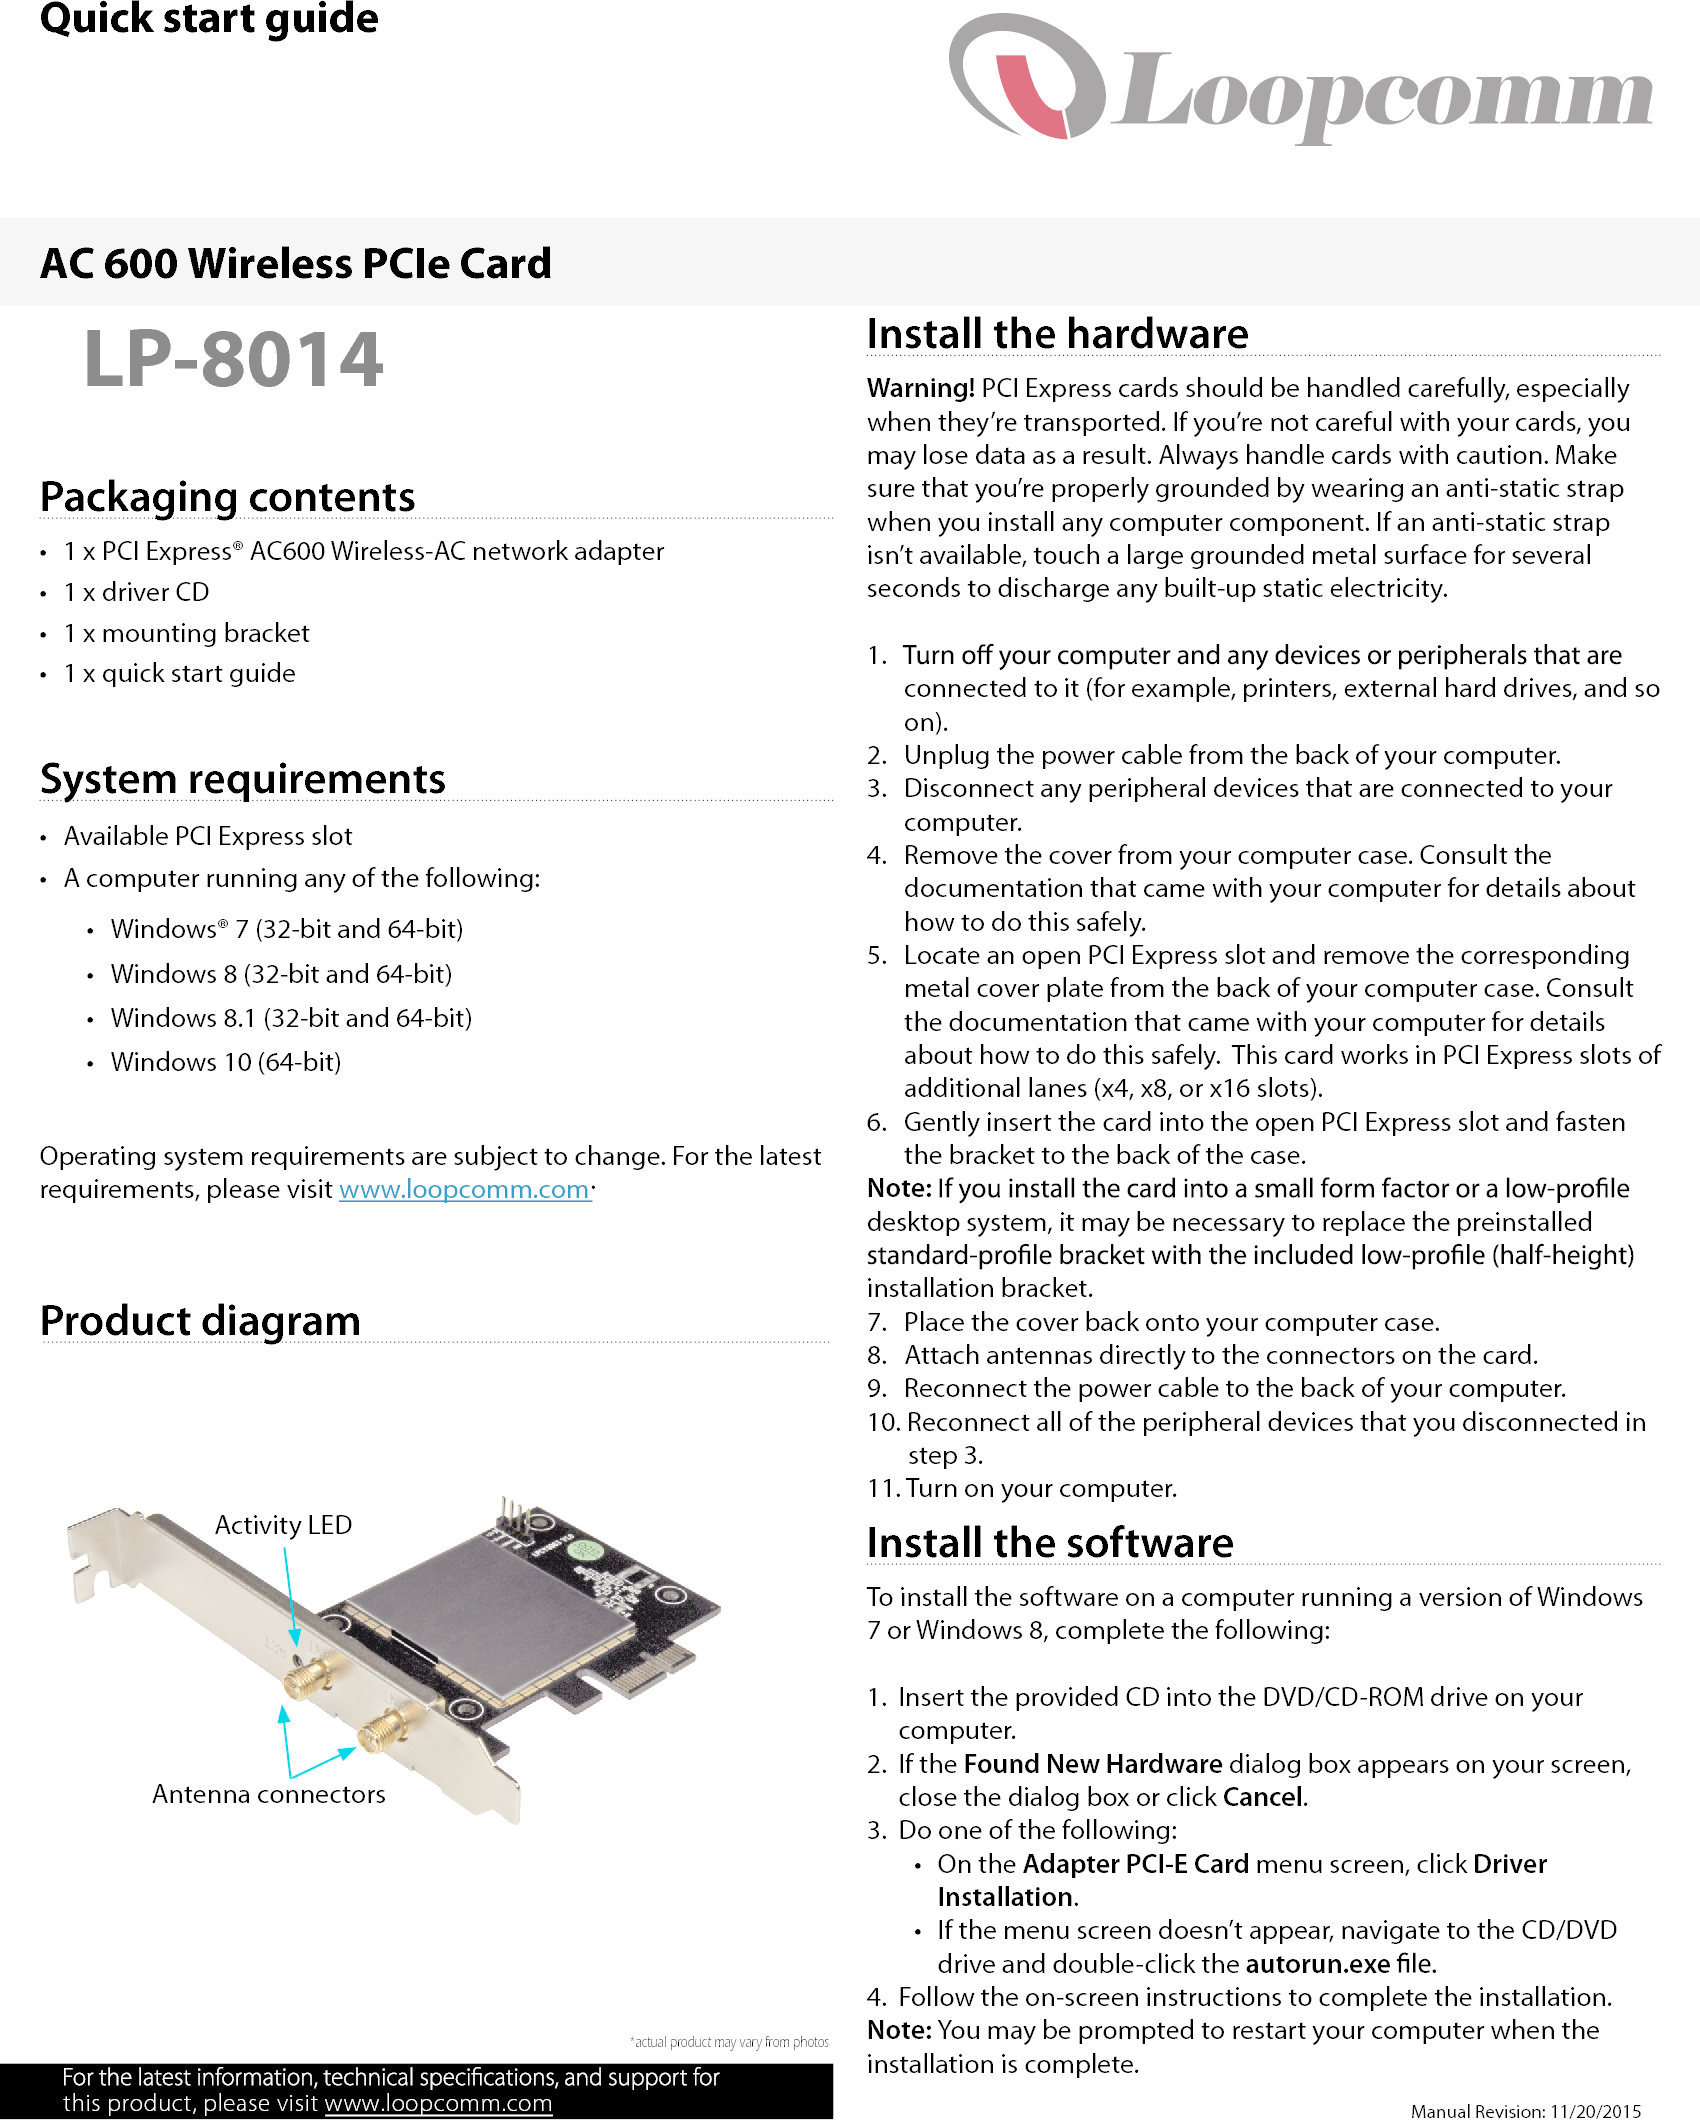 Quick start guideManual Revision: 11/20/2015www.loopcomm.comPackaging contentsLP-8014•  1 x PCI Express® AC600 Wireless-AC network adapter•  1 x driver CD•  1 x mounting bracket•  1 x quick start guideSystem requirements•  Available PCI Express slot•  A computer running any of the following:•  Windows® 7 (32-bit and 64-bit)•  Windows 8 (32-bit and 64-bit)•  Windows 8.1 (32-bit and 64-bit)•  Windows 10 (64-bit)Operating system requirements are subject to change. For the latest requirements, please visit www.loopcomm.com.AC 600 Wireless PCIe Card*actual product may vary from photosProduct diagramInstall the hardwareWarning! PCI Express cards should be handled carefully, especially when they’re transported. If you’re not careful with your cards, you may lose data as a result. Always handle cards with caution. Make sure that you’re properly grounded by wearing an anti-static strap when you install any computer component. If an anti-static strap isn’t available, touch a large grounded metal surface for several seconds to discharge any built-up static electricity.1.    connected to it (for example, printers, external hard drives, and so  on).2.   Unplug the power cable from the back of your computer.3.   Disconnect any peripheral devices that are connected to your  computer.4.   Remove the cover from your computer case. Consult the  documentation that came with your computer for details about  how to do this safely.5.   Locate an open PCI Express slot and remove the corresponding  metal cover plate from the back of your computer case. Consult  the documentation that came with your computer for details  about how to do this safely.  This card works in PCI Express slots of  additional lanes (x4, x8, or x16 slots).6.   Gently insert the card into the open PCI Express slot and fasten  the bracket to the back of the case.Note:desktop system, it may be necessary to replace the preinstalled installation bracket.7.   Place the cover back onto your computer case.8.   Attach antennas directly to the connectors on the card.9.   Reconnect the power cable to the back of your computer.10. Reconnect all of the peripheral devices that you disconnected in        step 3.11. Turn on your computer.Install the softwareTo install the software on a computer running a version of Windows 7 or Windows 8, complete the following:1.  Insert the provided CD into the DVD/CD-ROM drive on your computer.2.  If the Found New Hardware dialog box appears on your screen, close the dialog box or click Cancel.3.  Do one of the following:•  On the Adapter PCI-E Card menu screen, click Driver Installation.•  If the menu screen doesn’t appear, navigate to the CD/DVD drive and double-click the autorun.exe4.  Follow the on-screen instructions to complete the installation.Note: You may be prompted to restart your computer when the installation is complete.Activity LEDAntenna connectorsthis product, please visit 